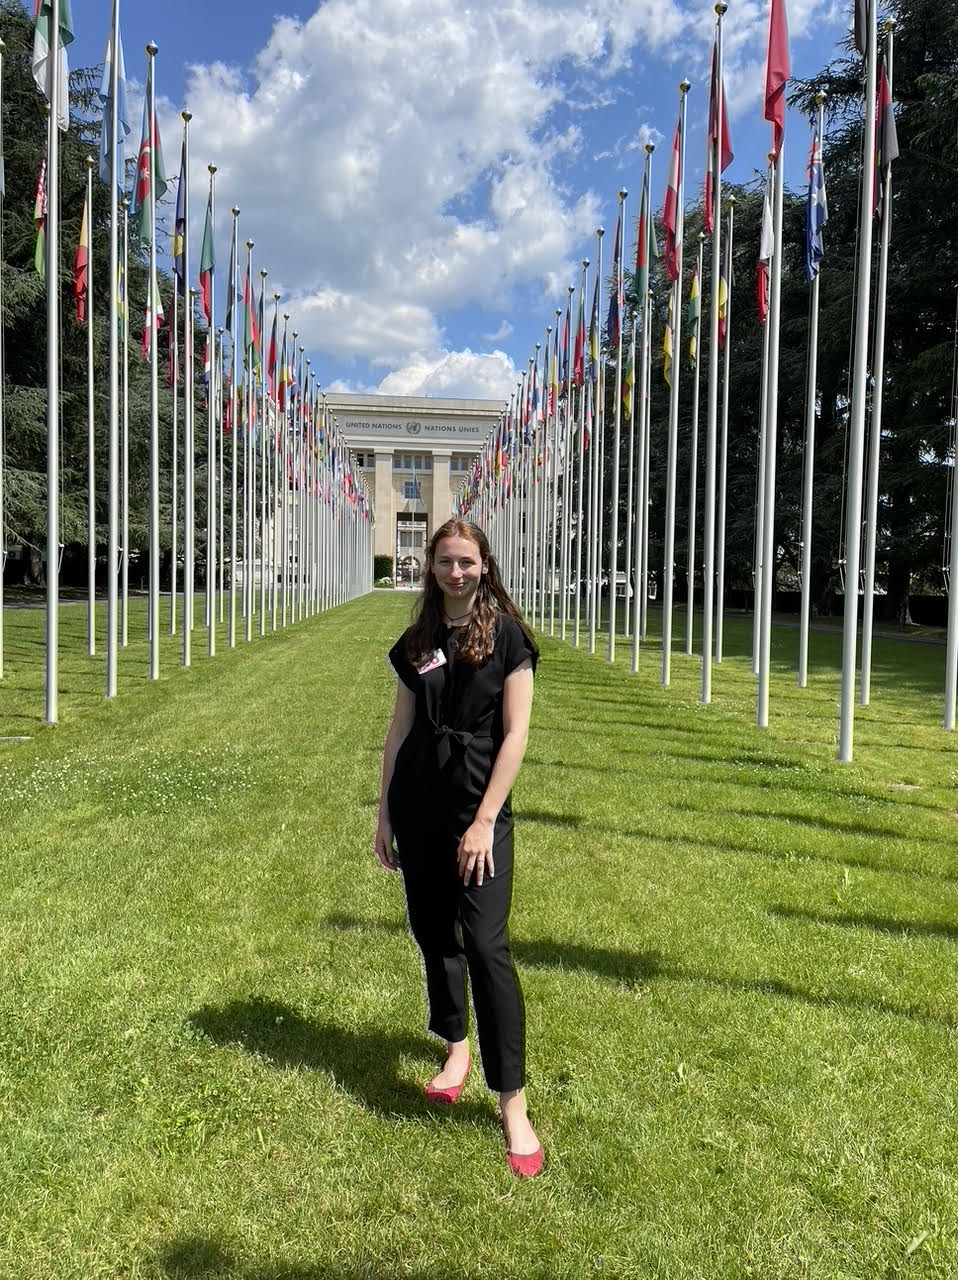 Hardy stands on a grassy lawn with flagpoles lining the lawn leading up to the UN building in Geneva.